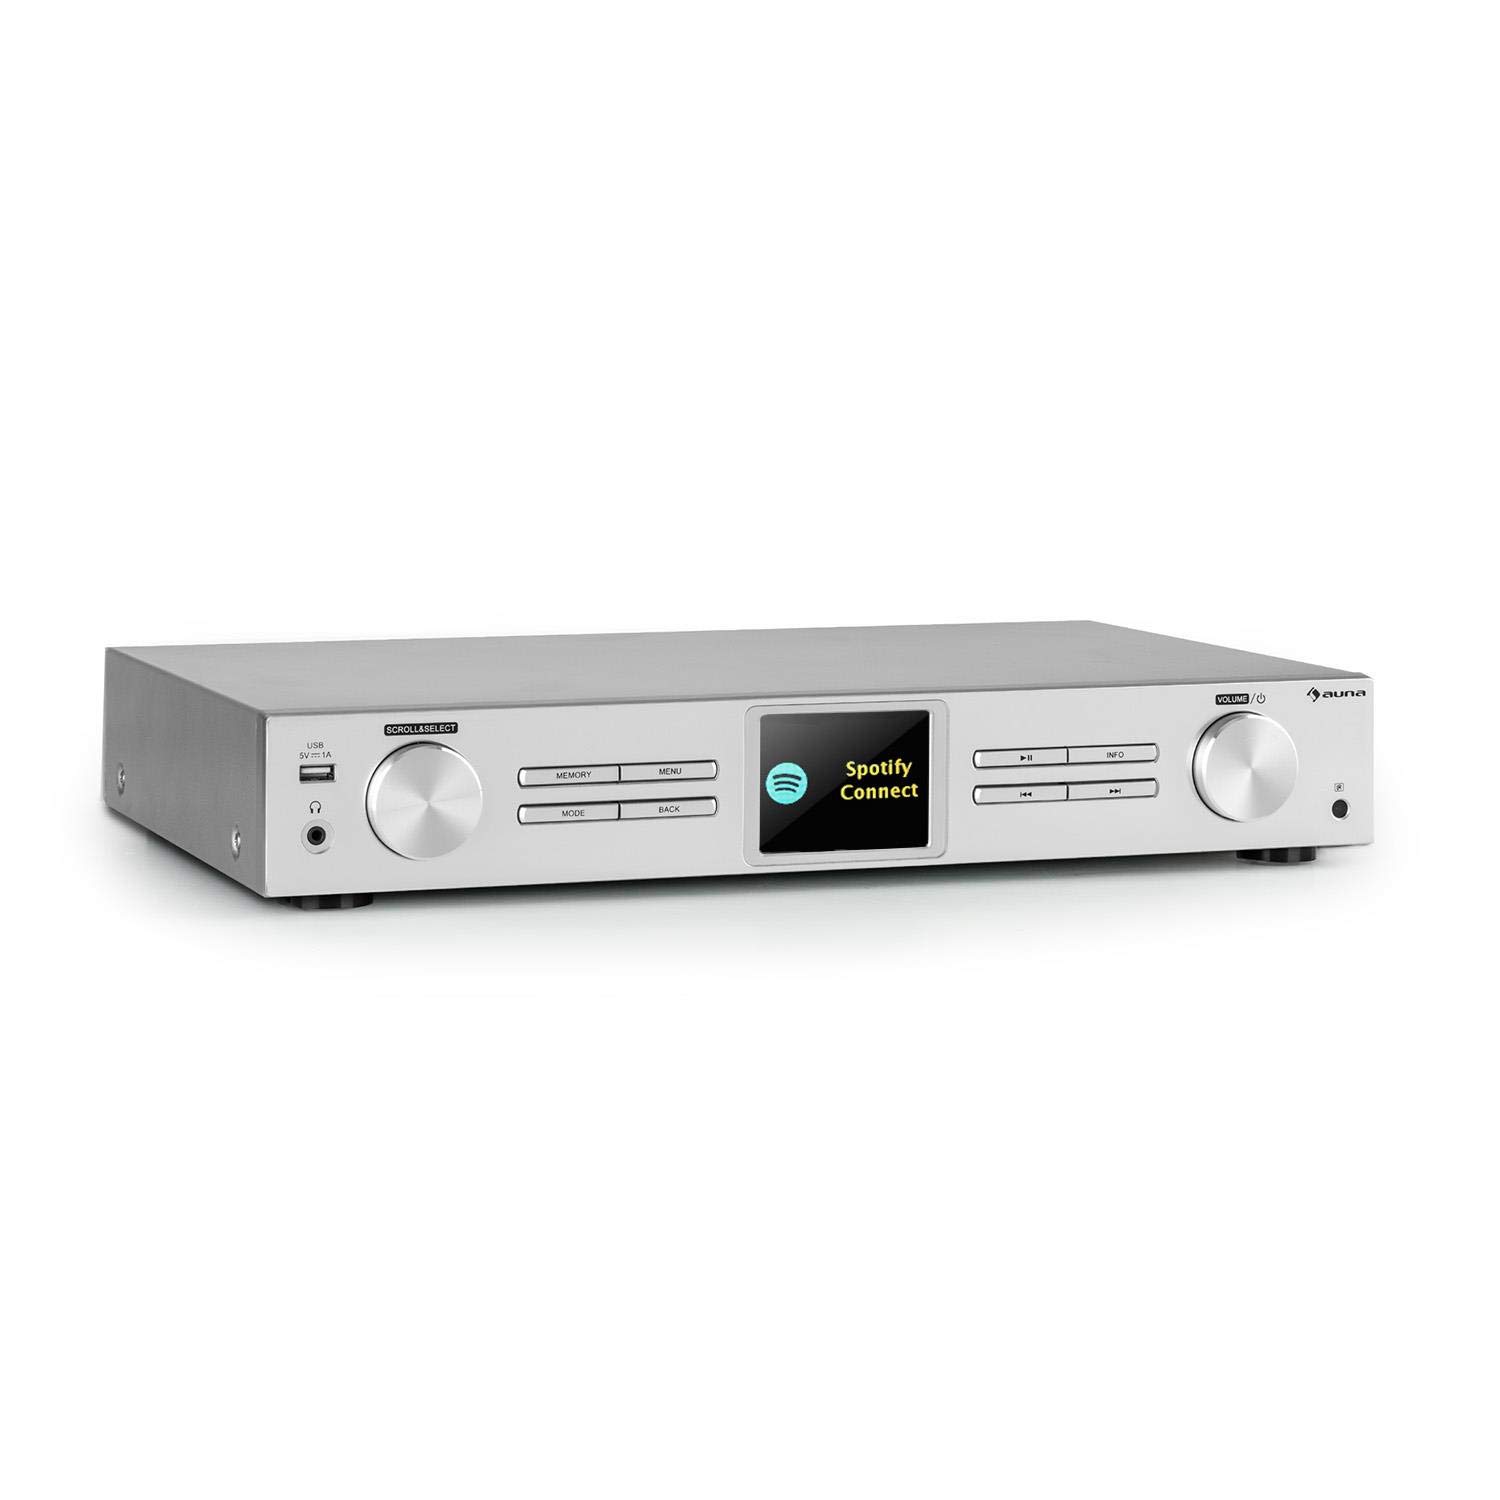 Mua auna iTuner CD HiFi Receiver - CD Player, HiFi Sytsem with Internet  Radio, CD-Player with FM Radio, DAB +, Many Connections, WiFi, Spotify  Connect, USB, Colour Display, Remote Control, no BT,